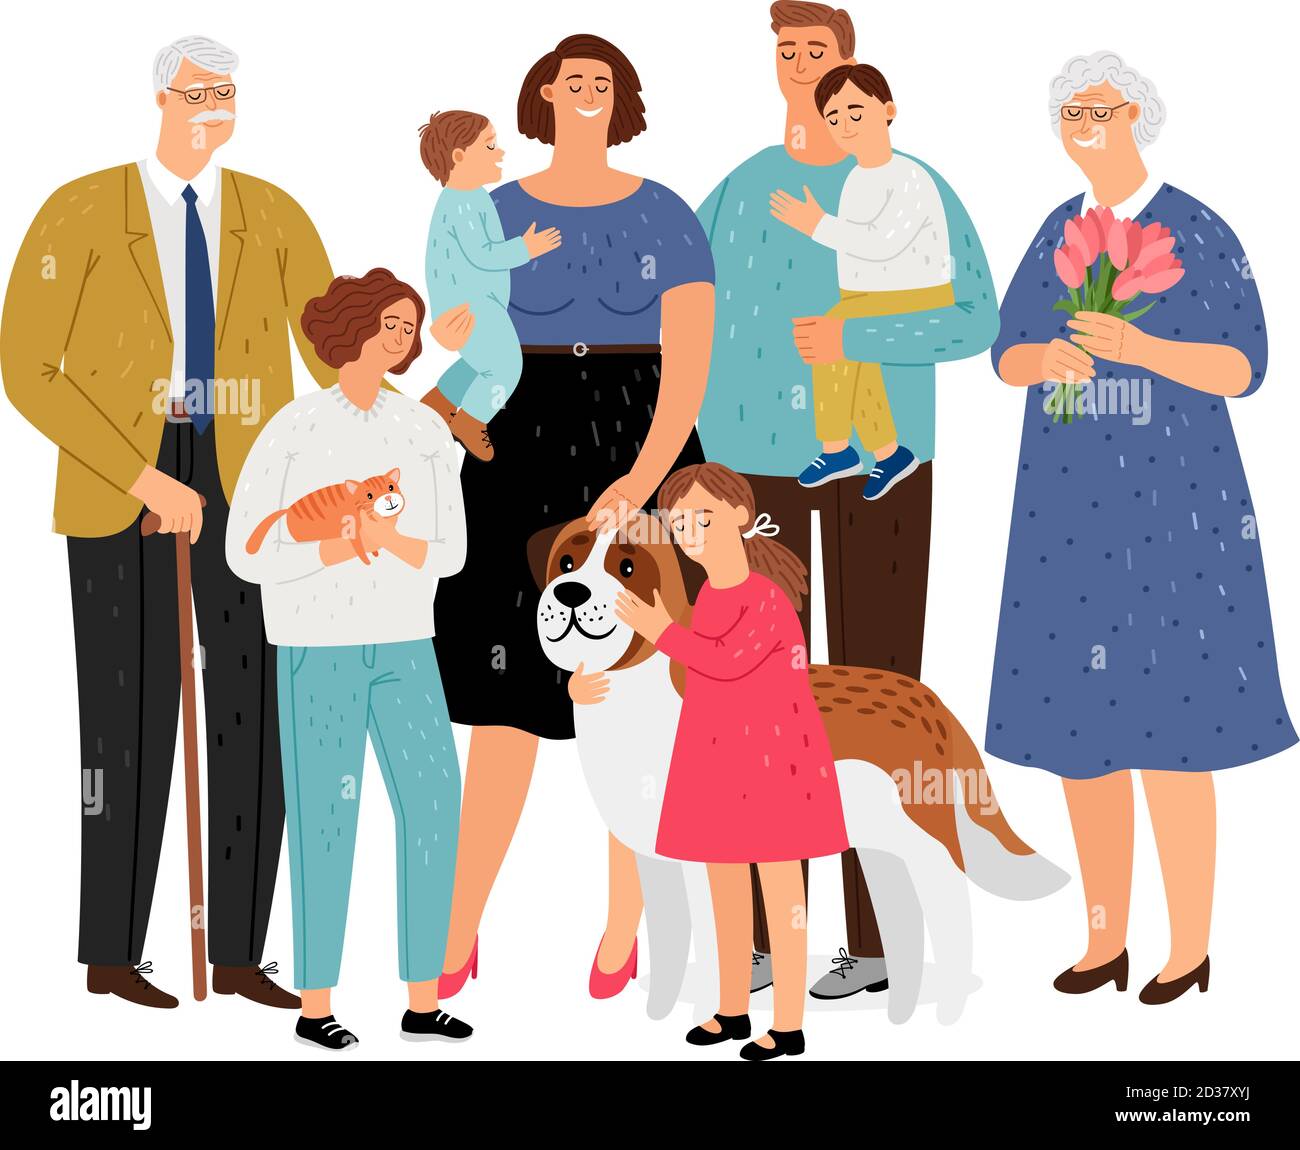 Large family portrait generations Stock Vector Images - Alamy